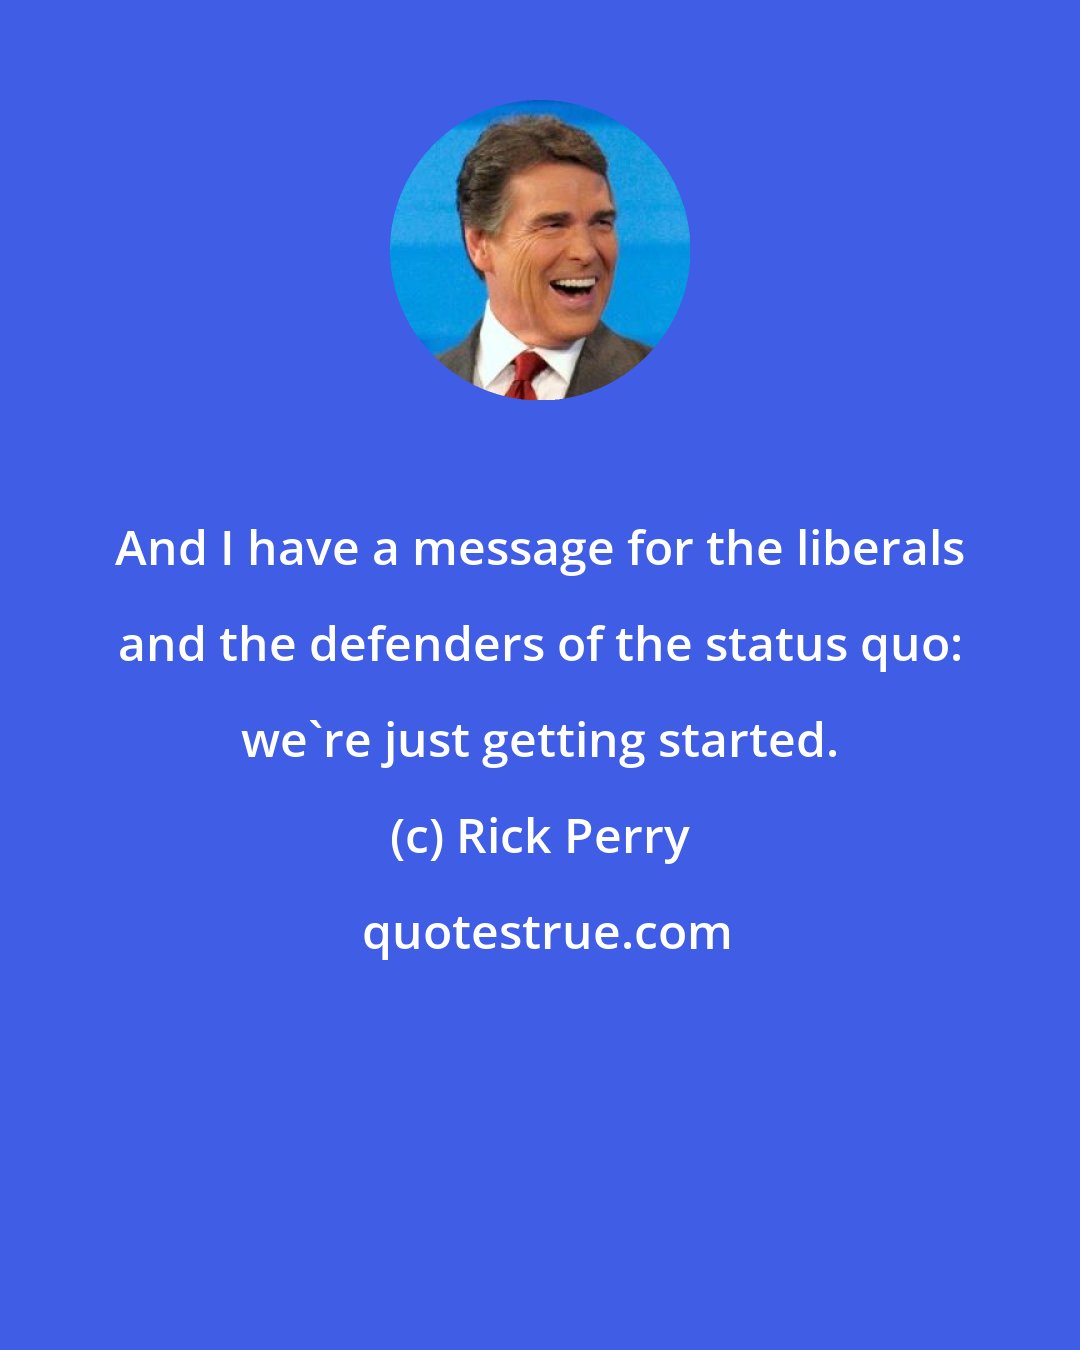 Rick Perry: And I have a message for the liberals and the defenders of the status quo: we're just getting started.